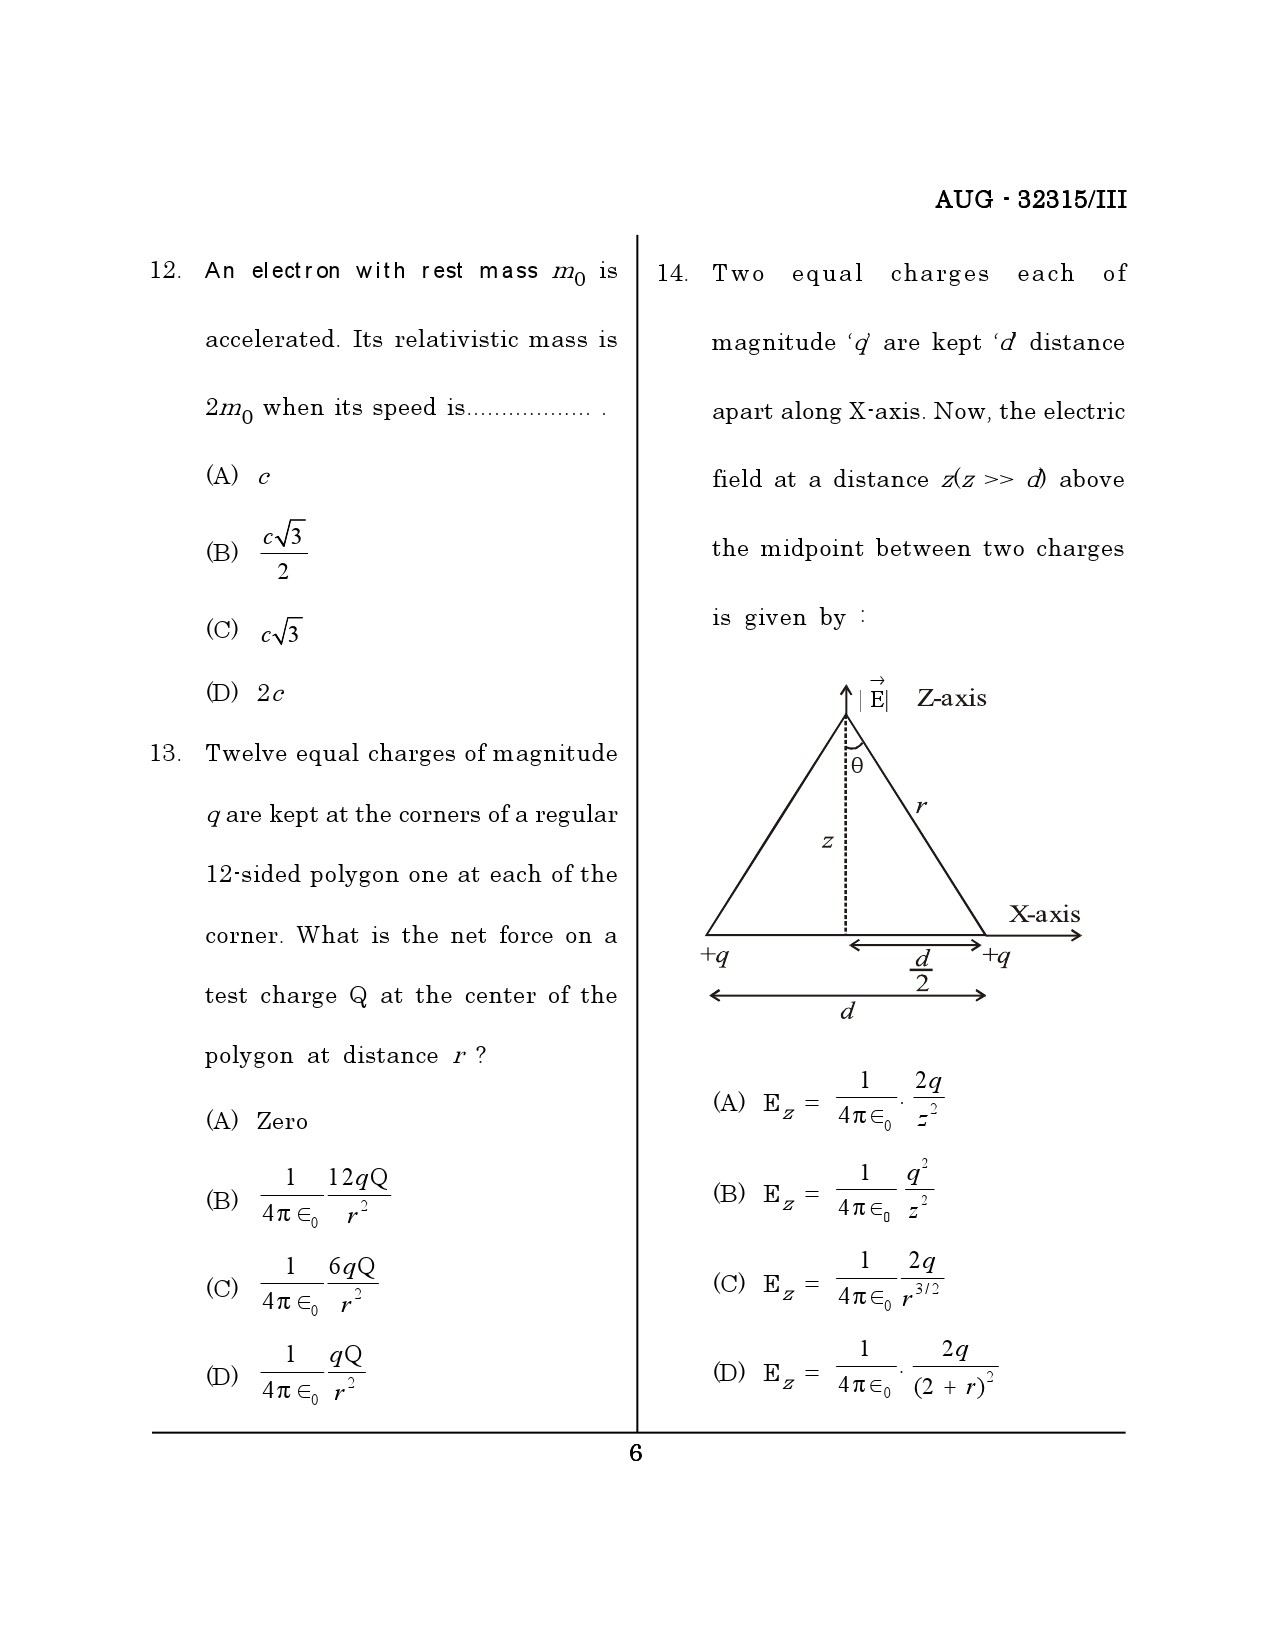 Maharashtra SET Physical Science Question Paper III August 2015 5